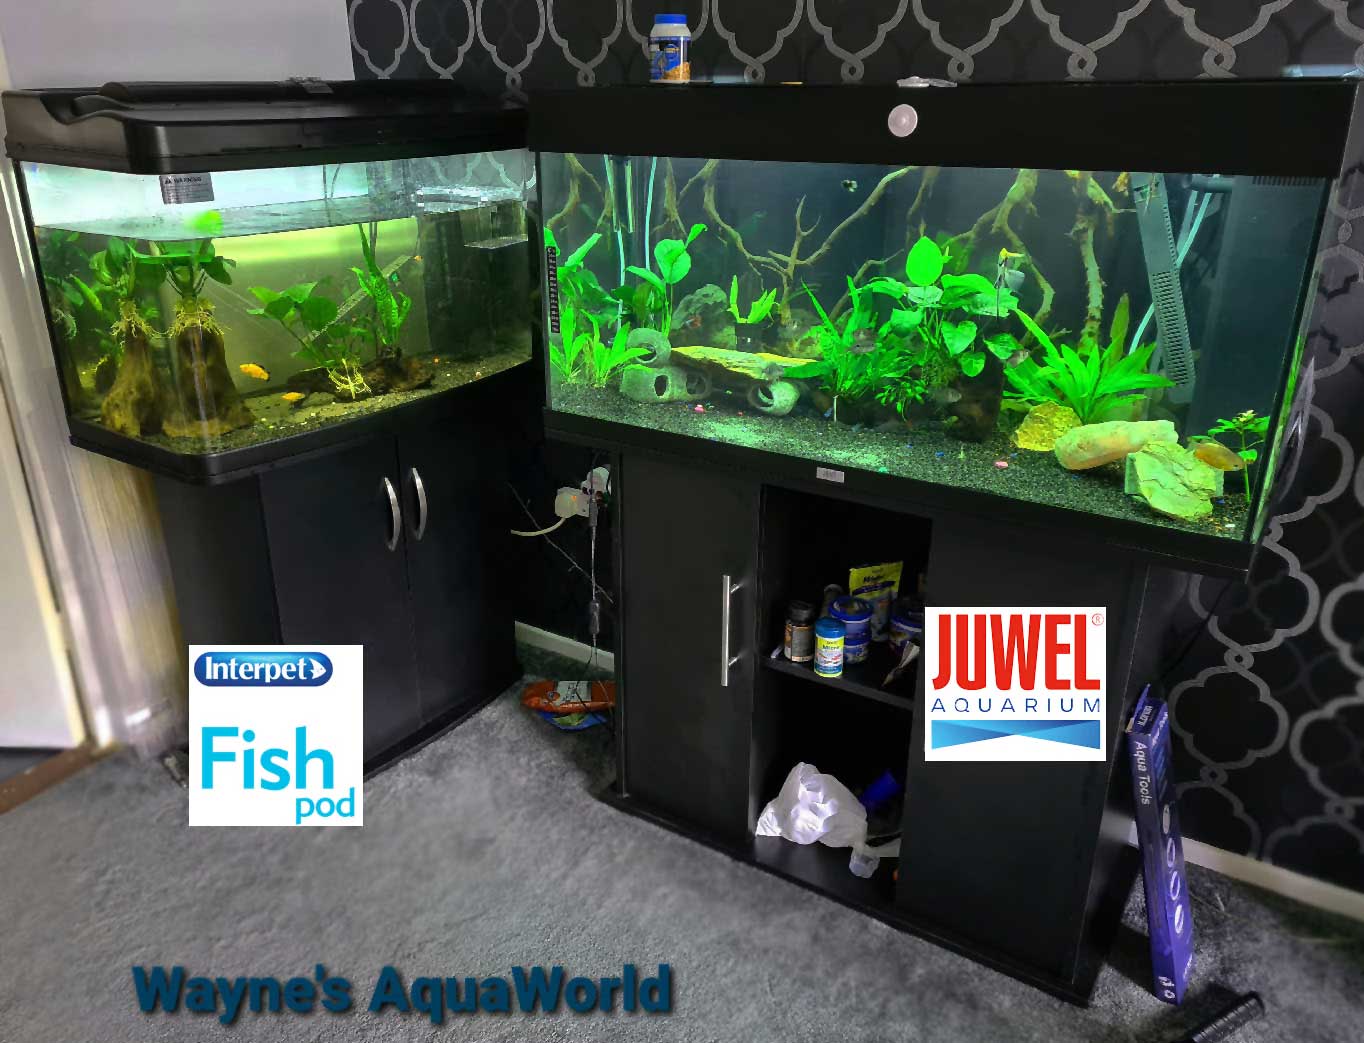 I've upgraded my Fish Tank Aquarium AGAIN!! If you’re looking for a great aquarium, here’s a simple guide by Wayne's Aqua World. setup